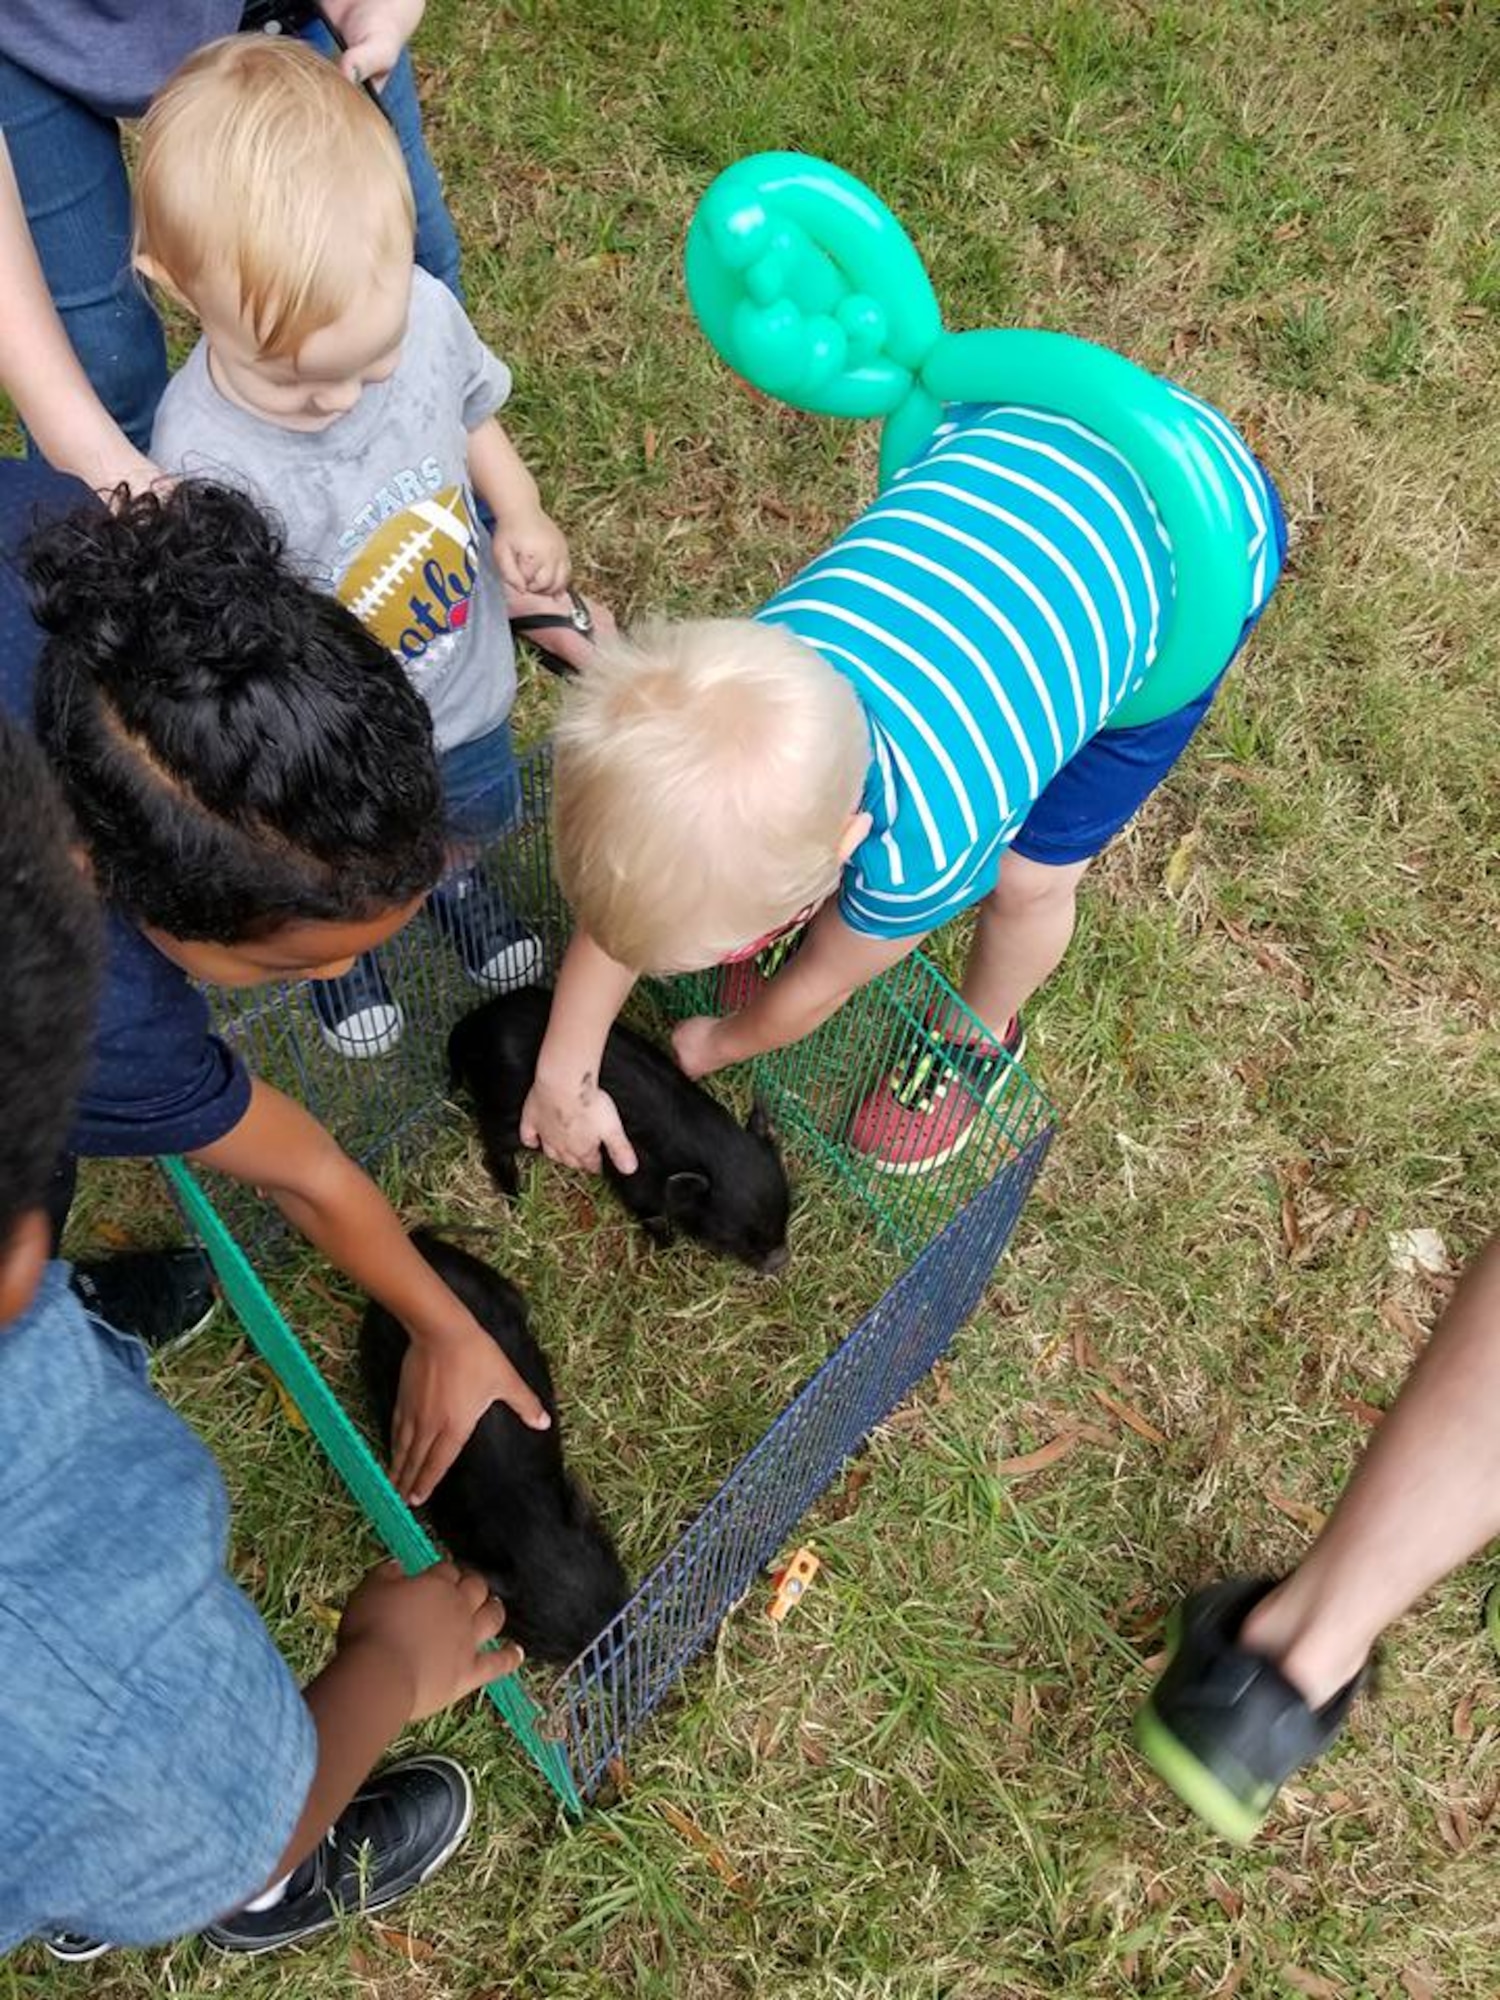 A group of children take turns petting piglets at this year's Family Day Oct. 14, 2017 at Dobbins Air Reserve Base, Ga. Family Day is held here annually as a way of bringing families on base to see what their Reserve Citizen Airmen do on drill weekends. (U.S. Air Force photo/Senior Airman Lauren Douglas)